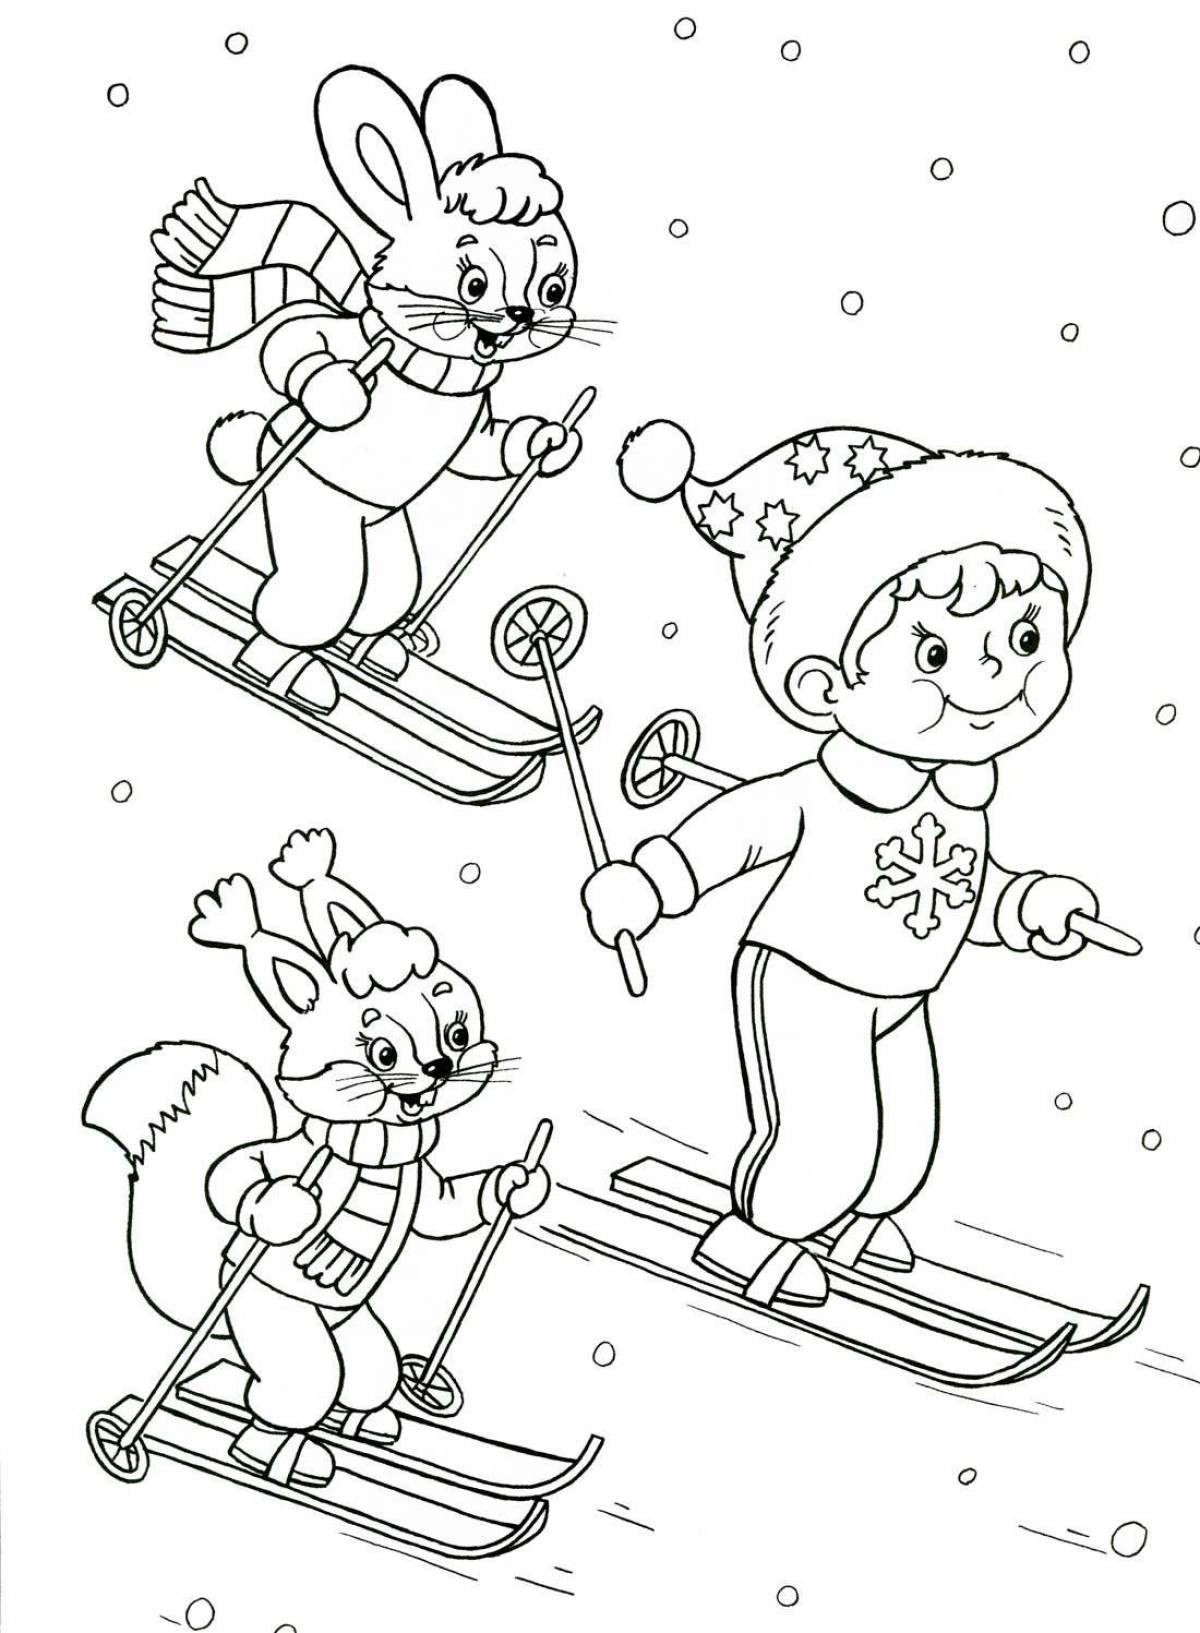 Glamorous winter coloring book for kids 4-5 years old